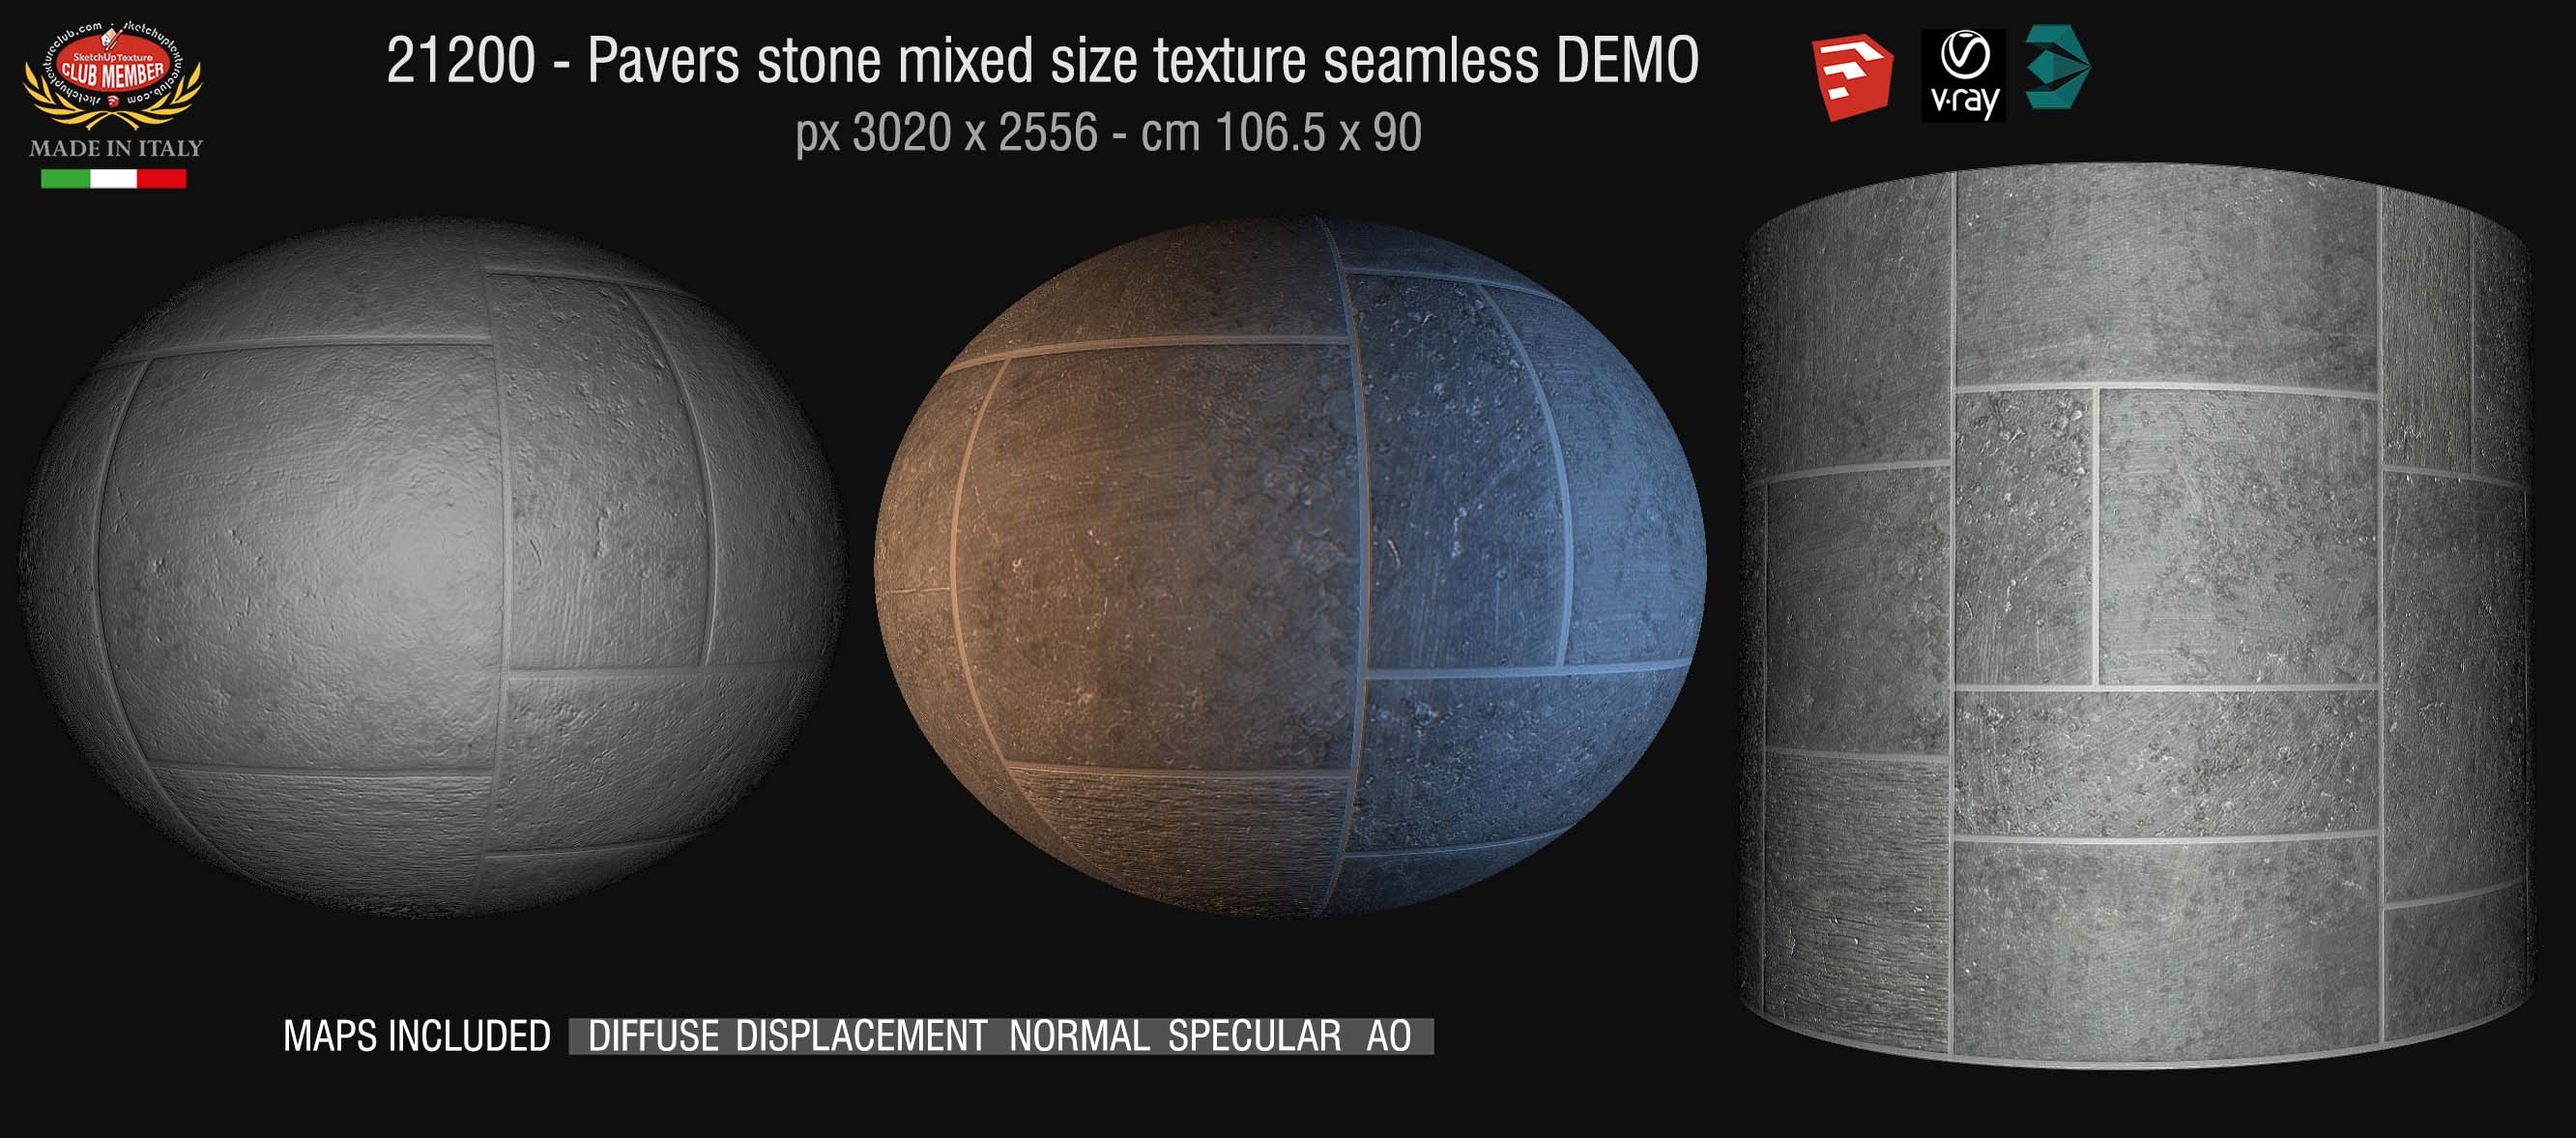 21200 Pavers stone mixed size texture + maps DEMO